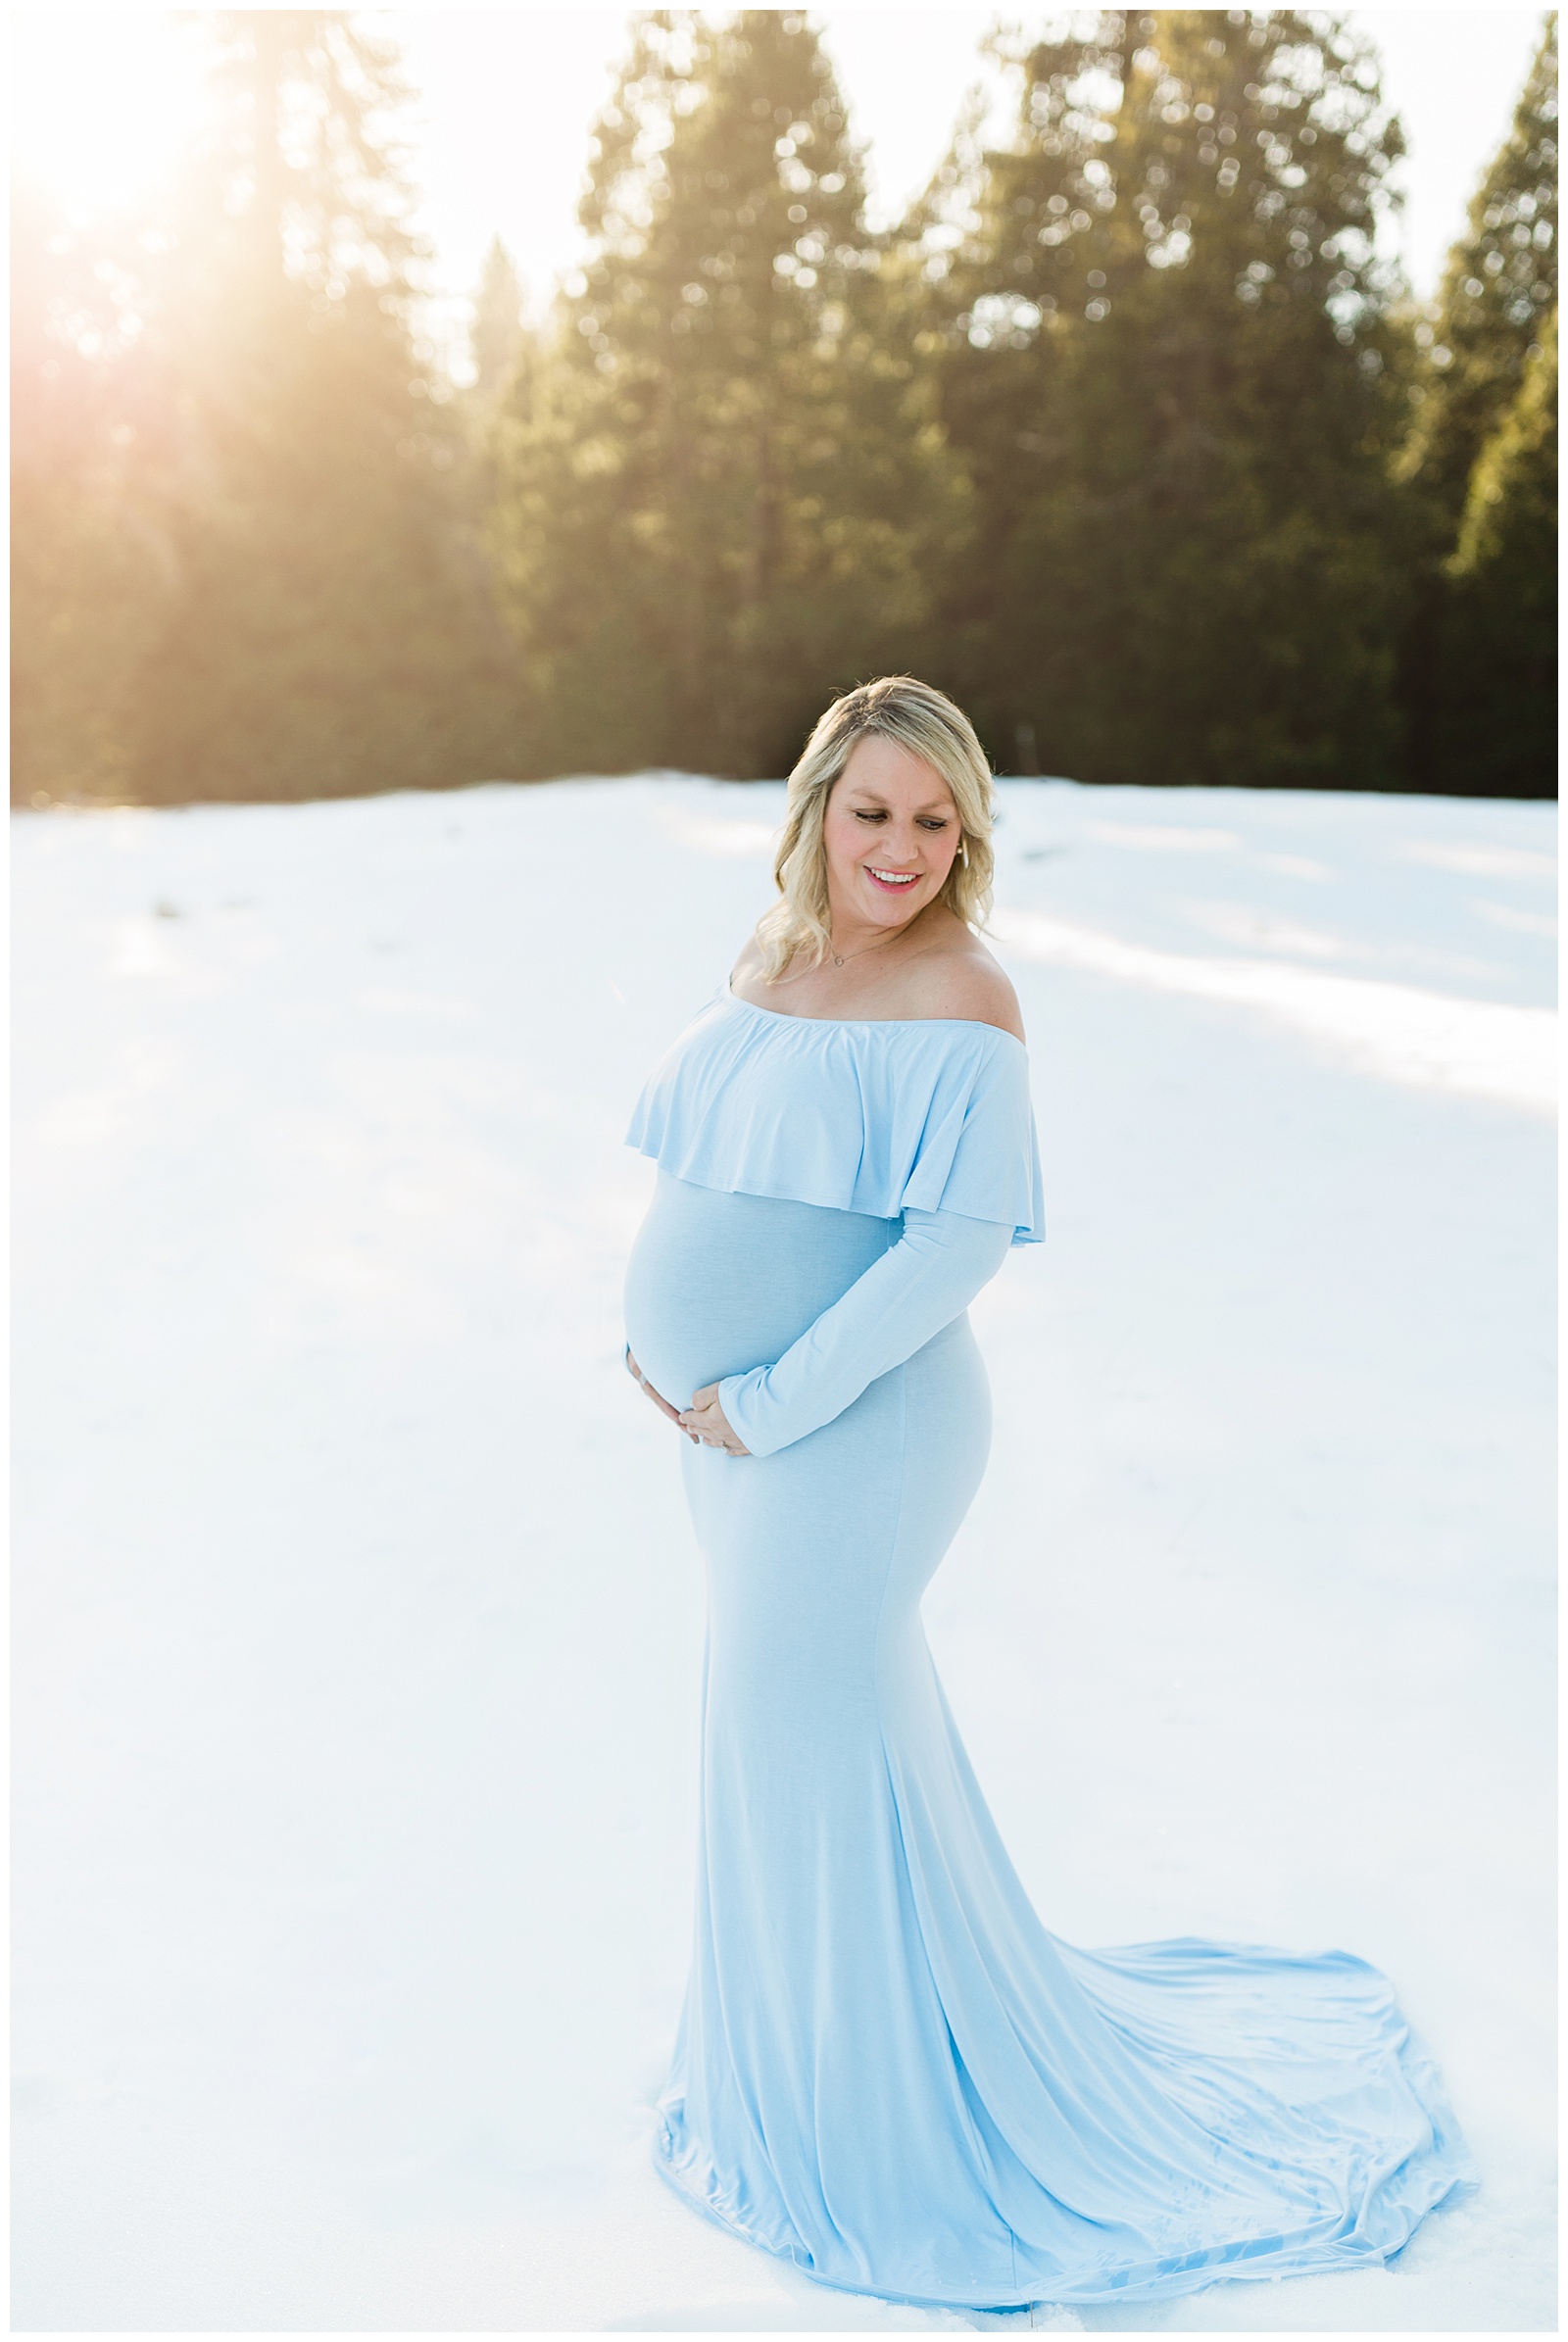 expecting mother posing in the snow for winter maternity photos